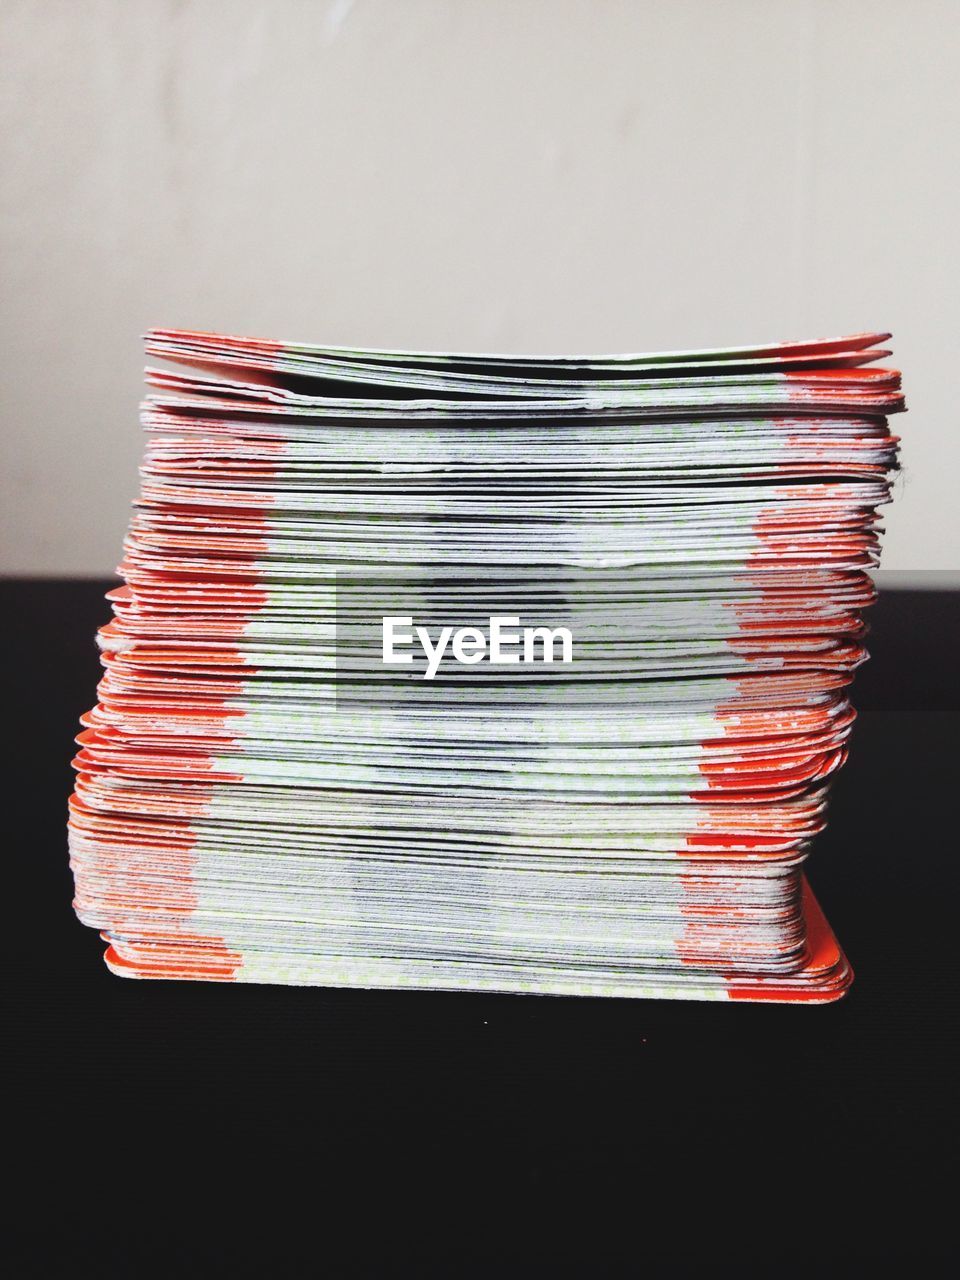 Stack of train tickets on table